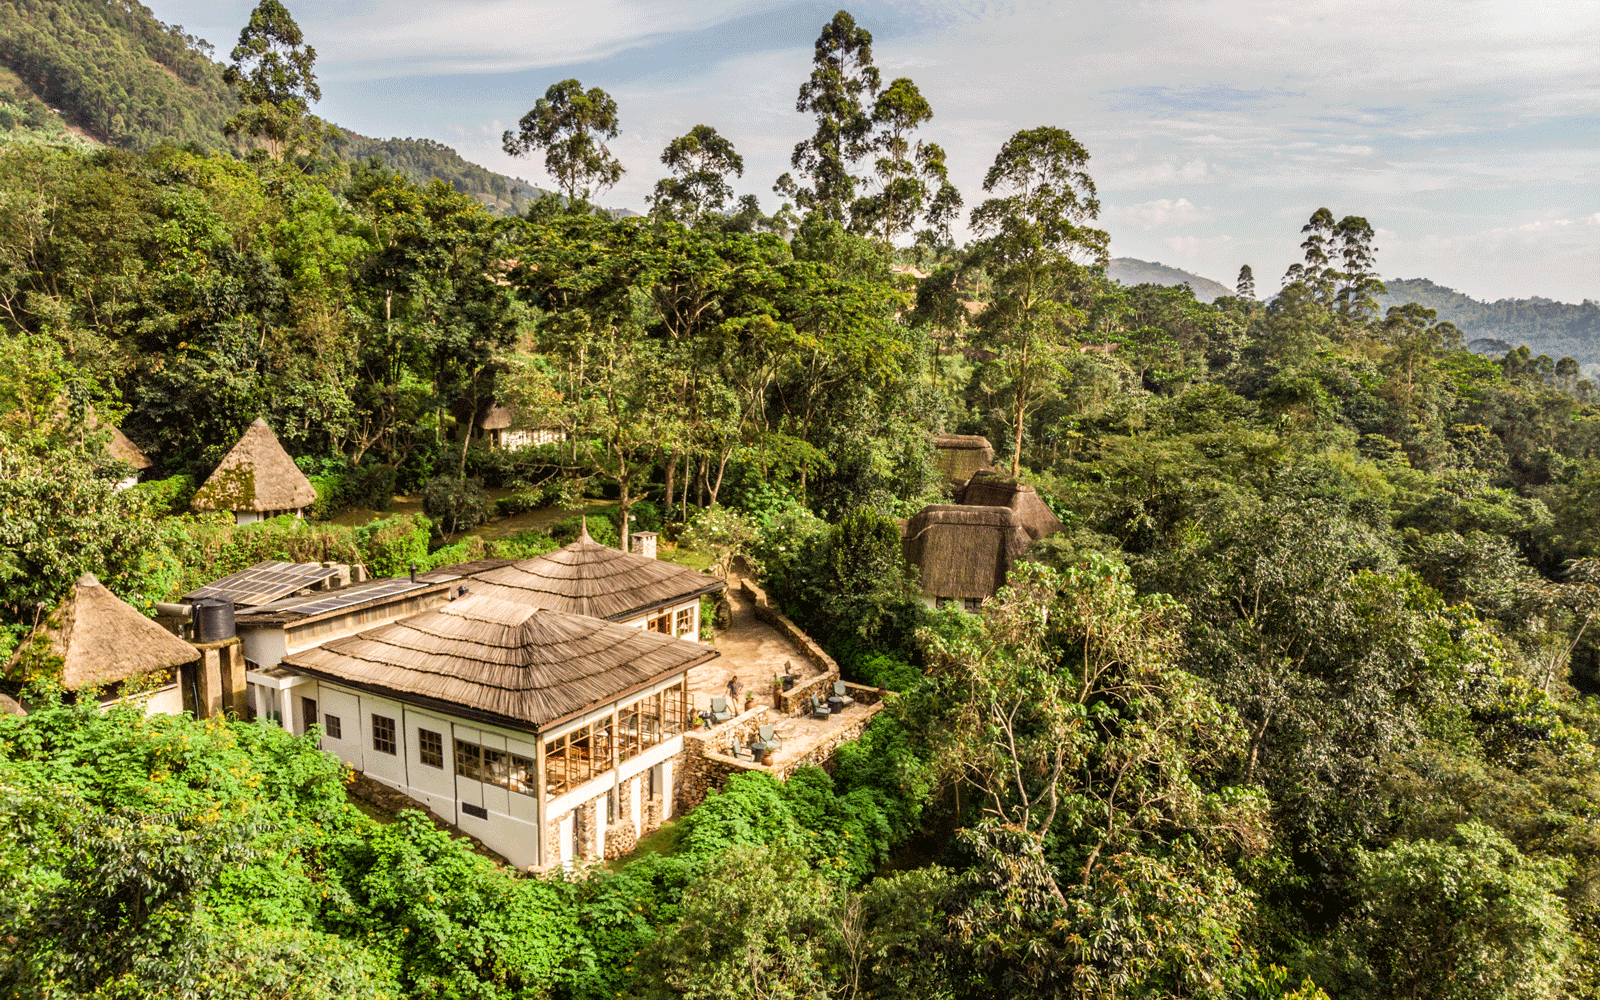 Volcanoes Safaris’ Bwindi Lodge featured in Forbes